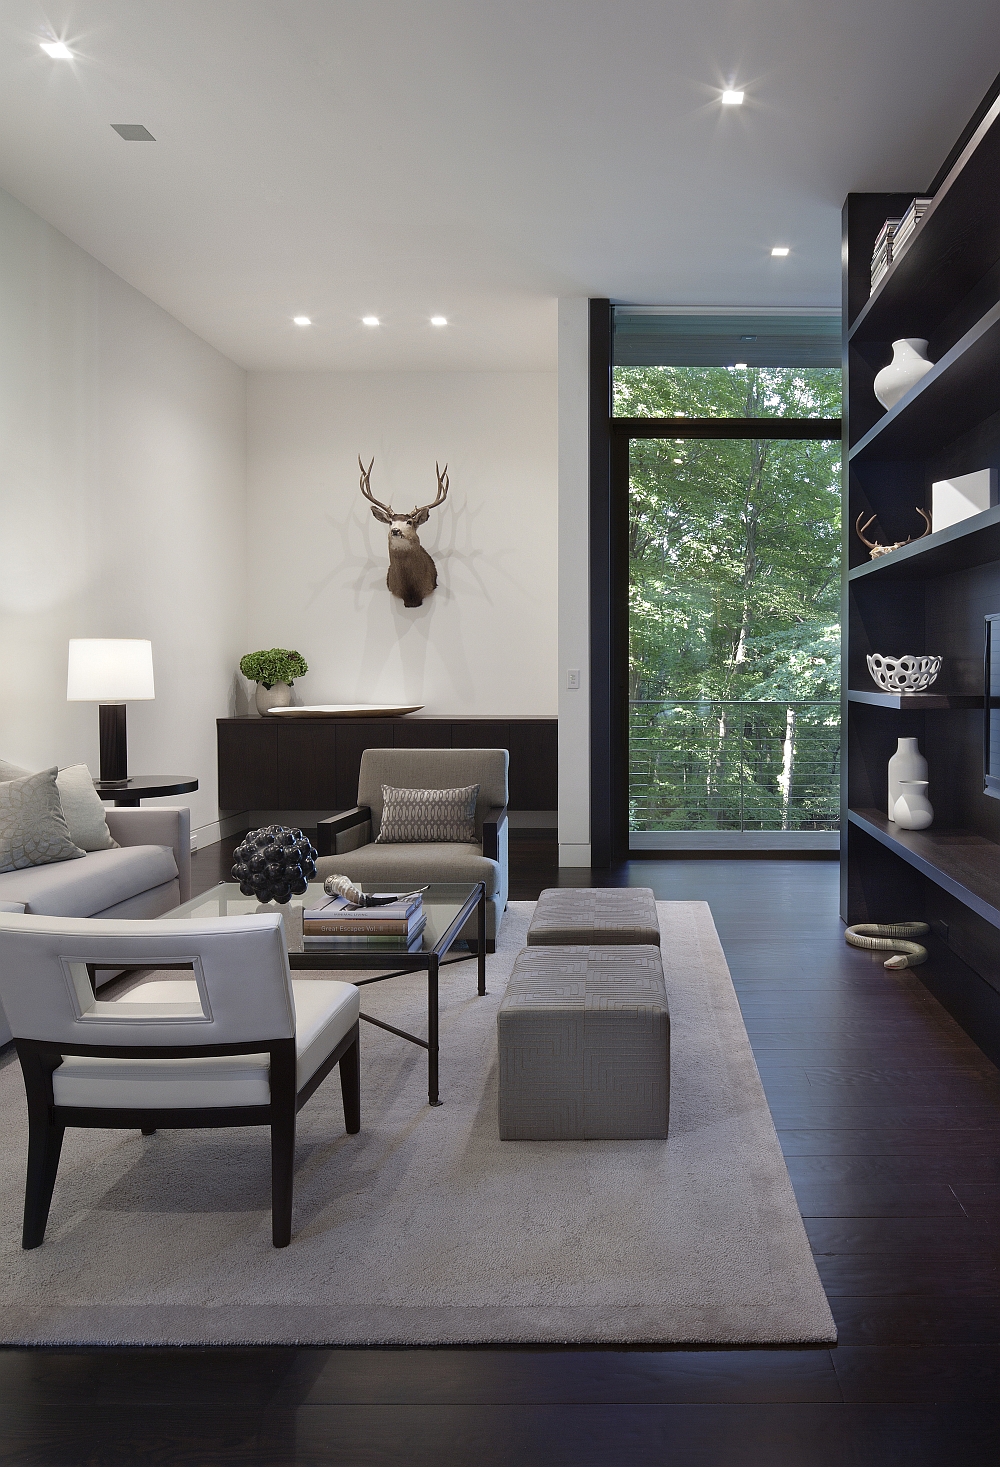 Family area with cube ottomans and open shelves